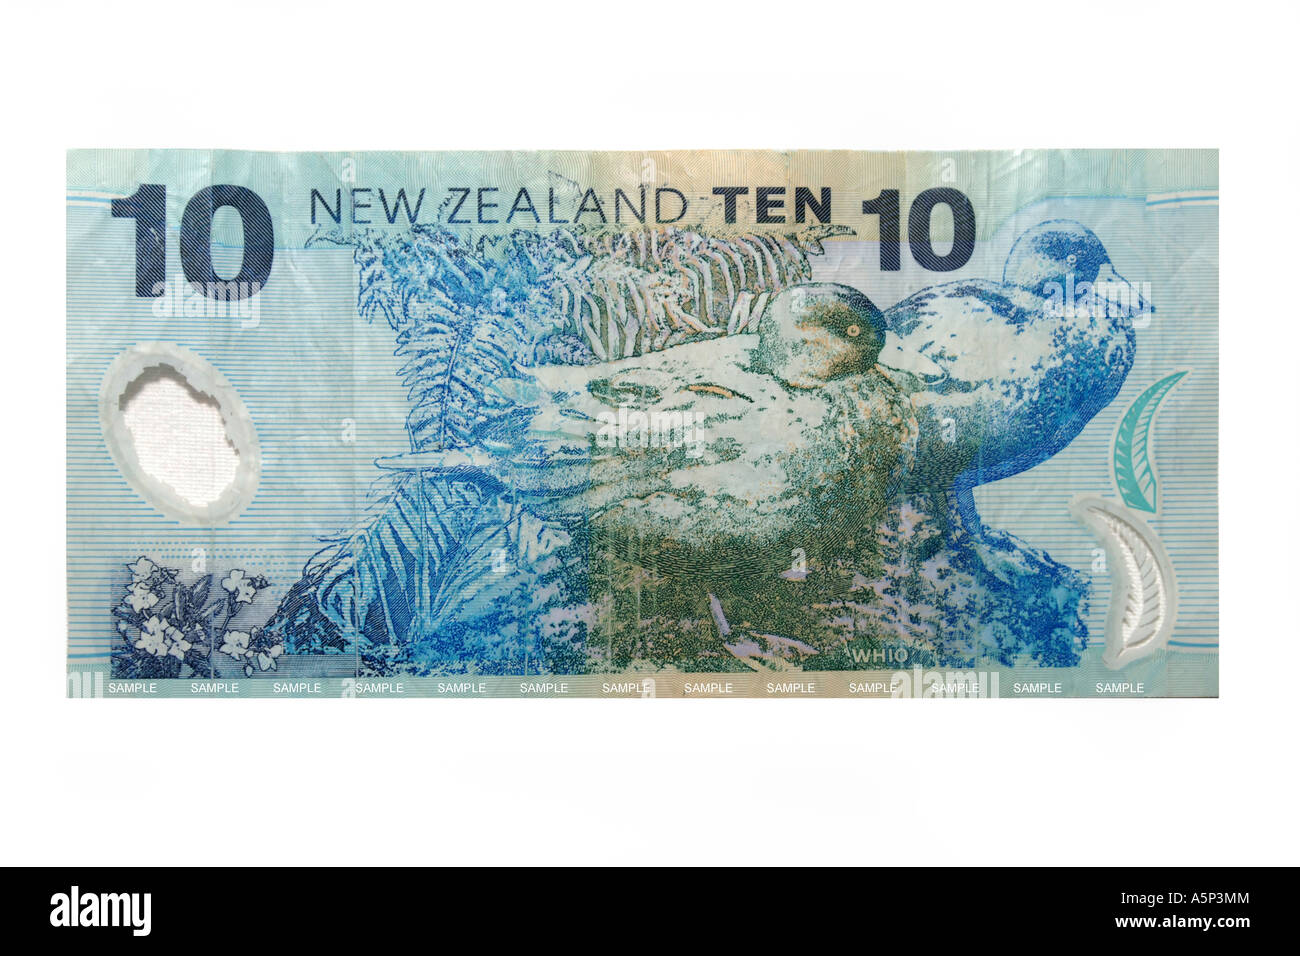 A Whio on the back of a New Zealand 10 Dollar Note. Stock Photo